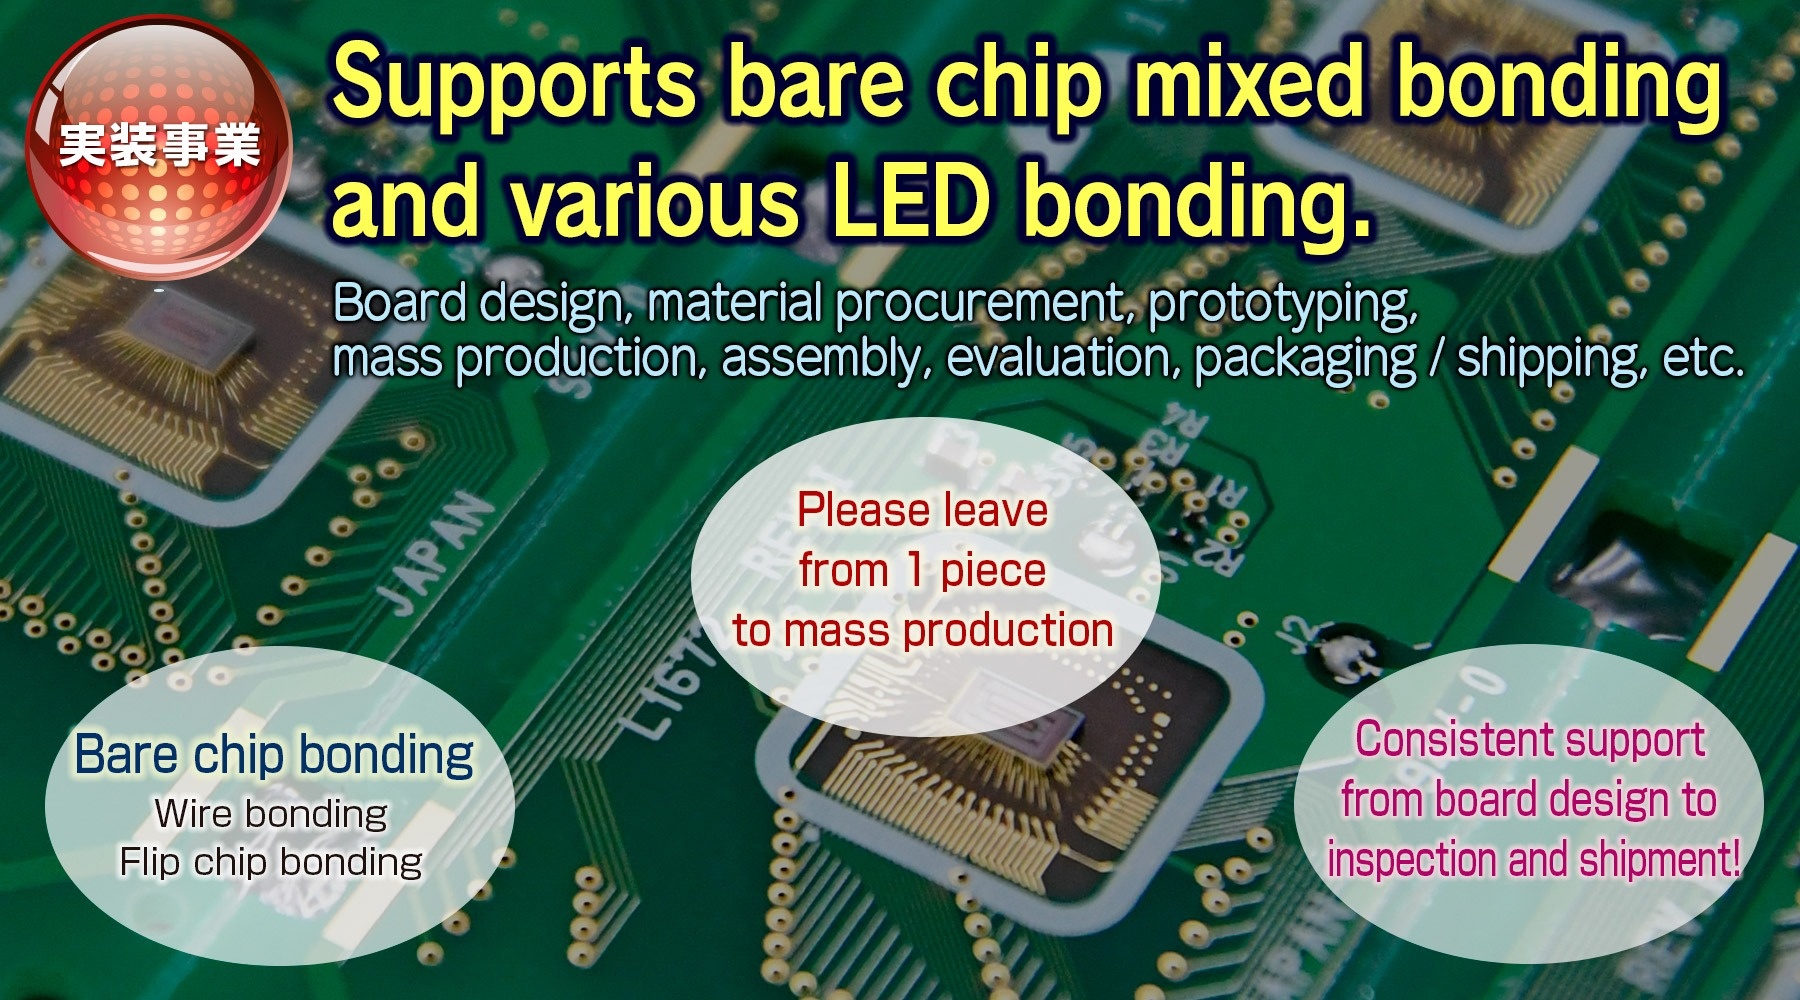 Supports bare chip mixed bonding and various LED bonding.